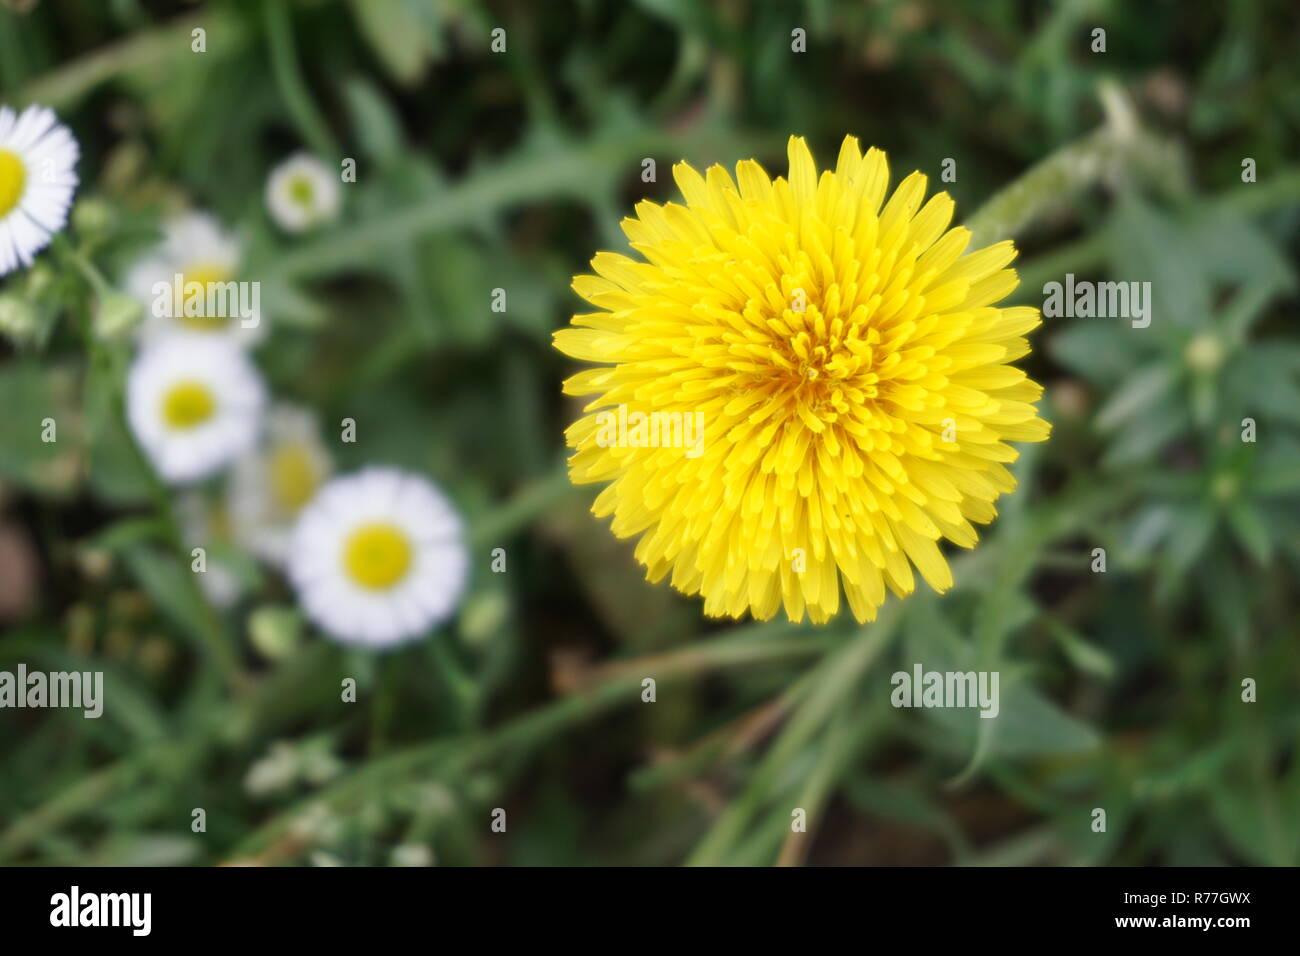 Yellow flower close-up, flower background Stock Photo